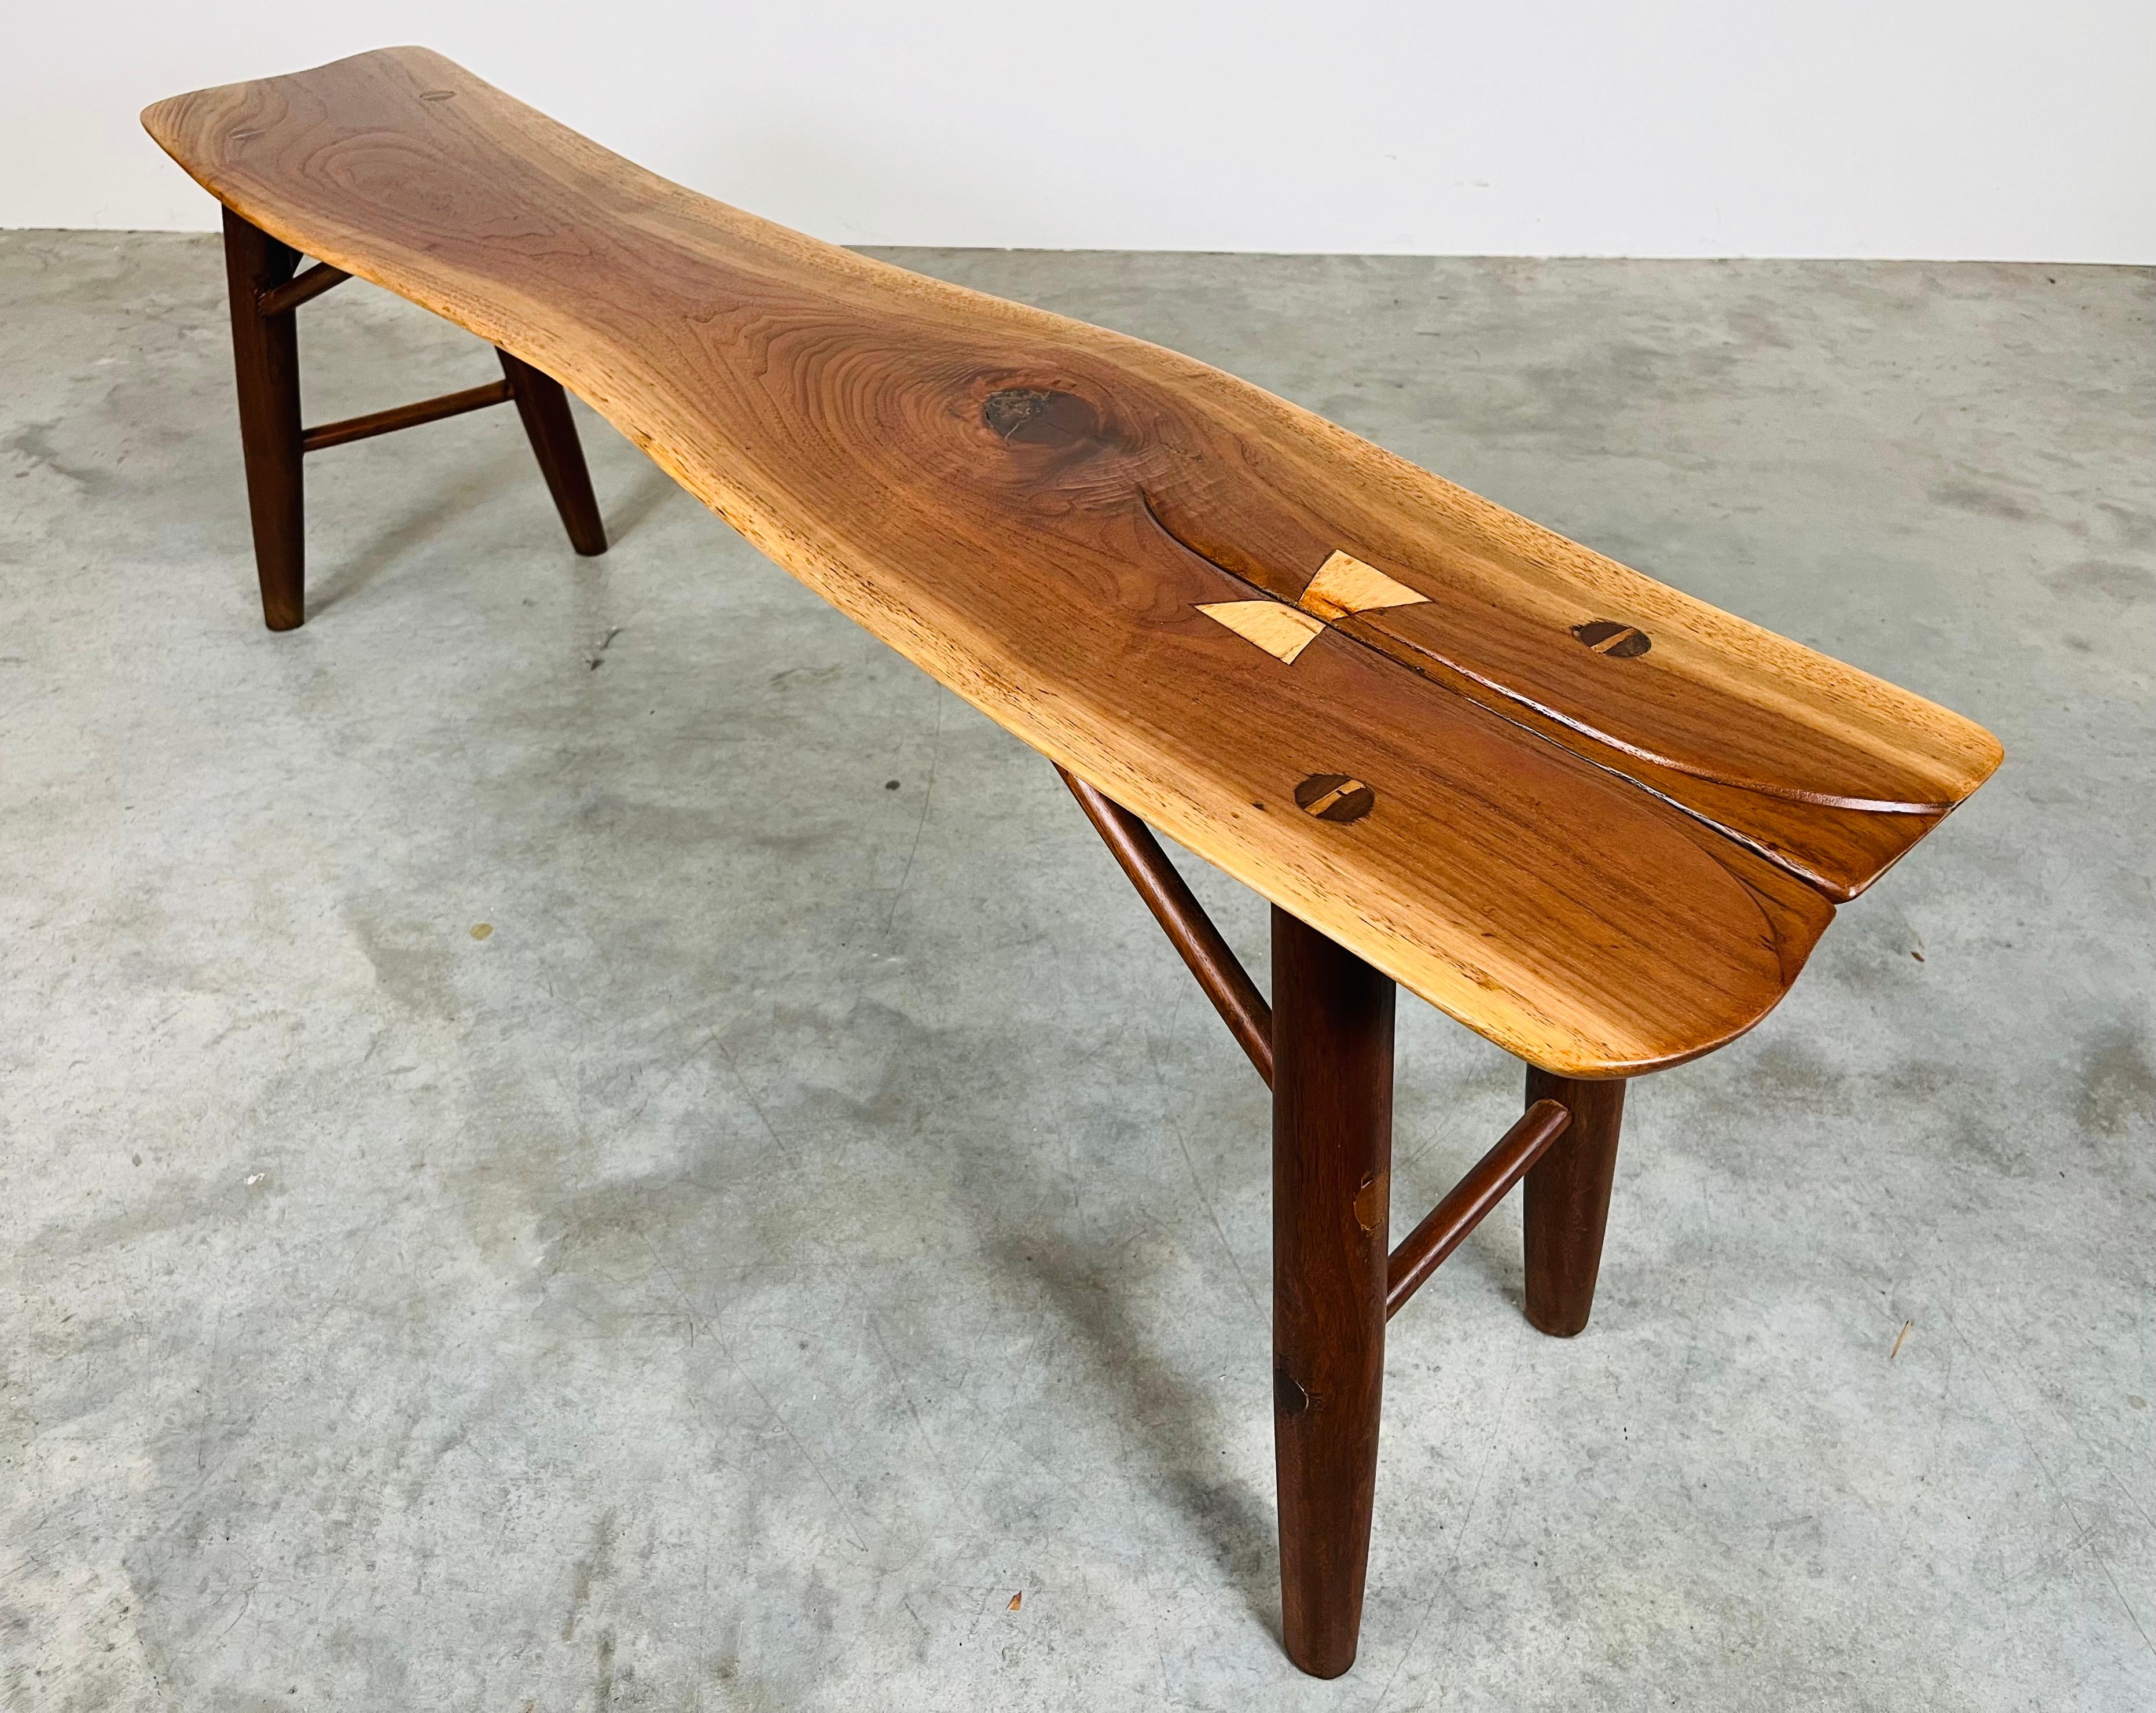 A beautifully hand carved Freeform studio bench in solid walnut by master craftsman Herbert Millstone circa 1963. Millstone was known to host lunch parties for the likes of Paul Evans, Phil Powell and George Nakashima as they would discuss their